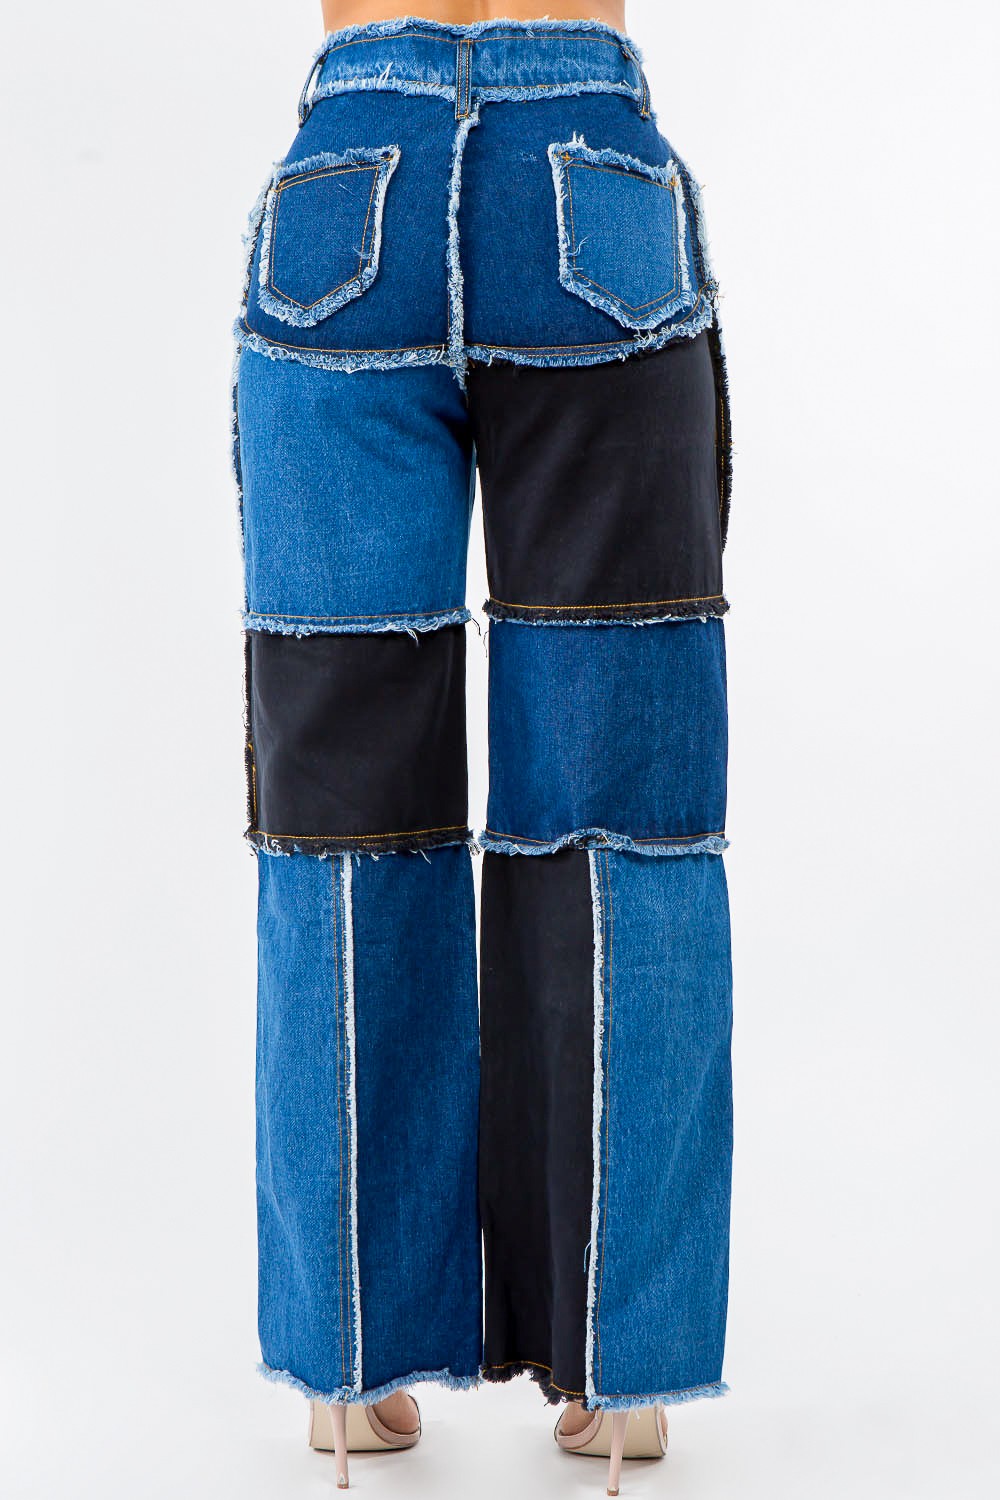 "Its giving Fall" Wide Leg Patchwork Pants